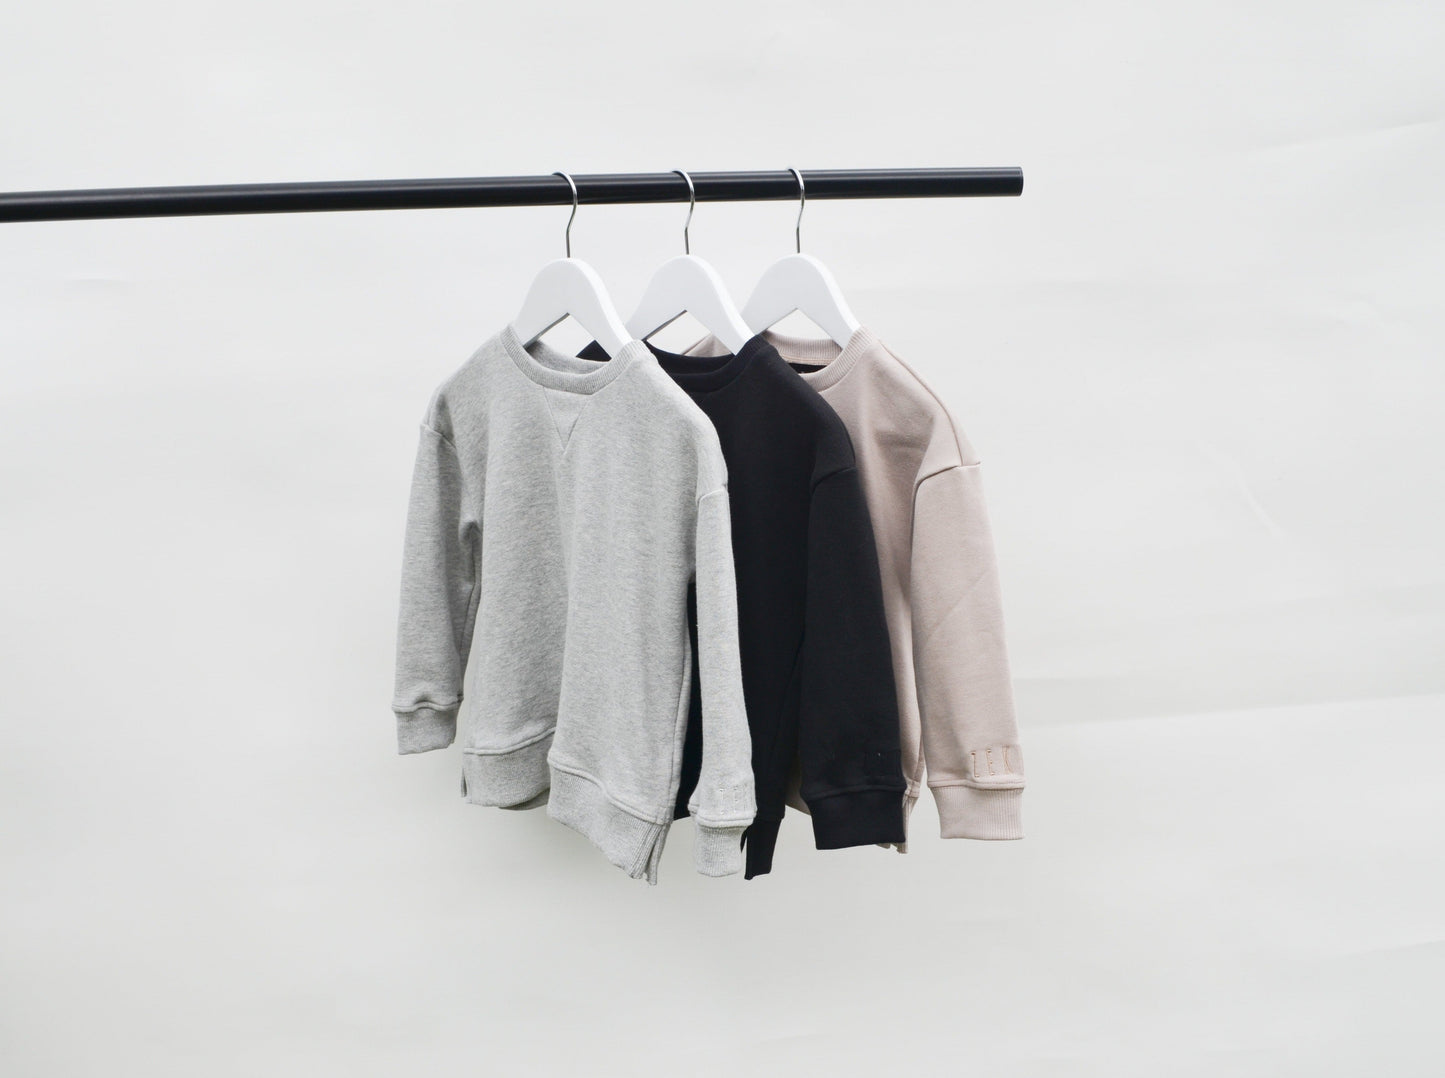 Grey, black and smokey colour longline jumpers on coat hangers hanging from pole